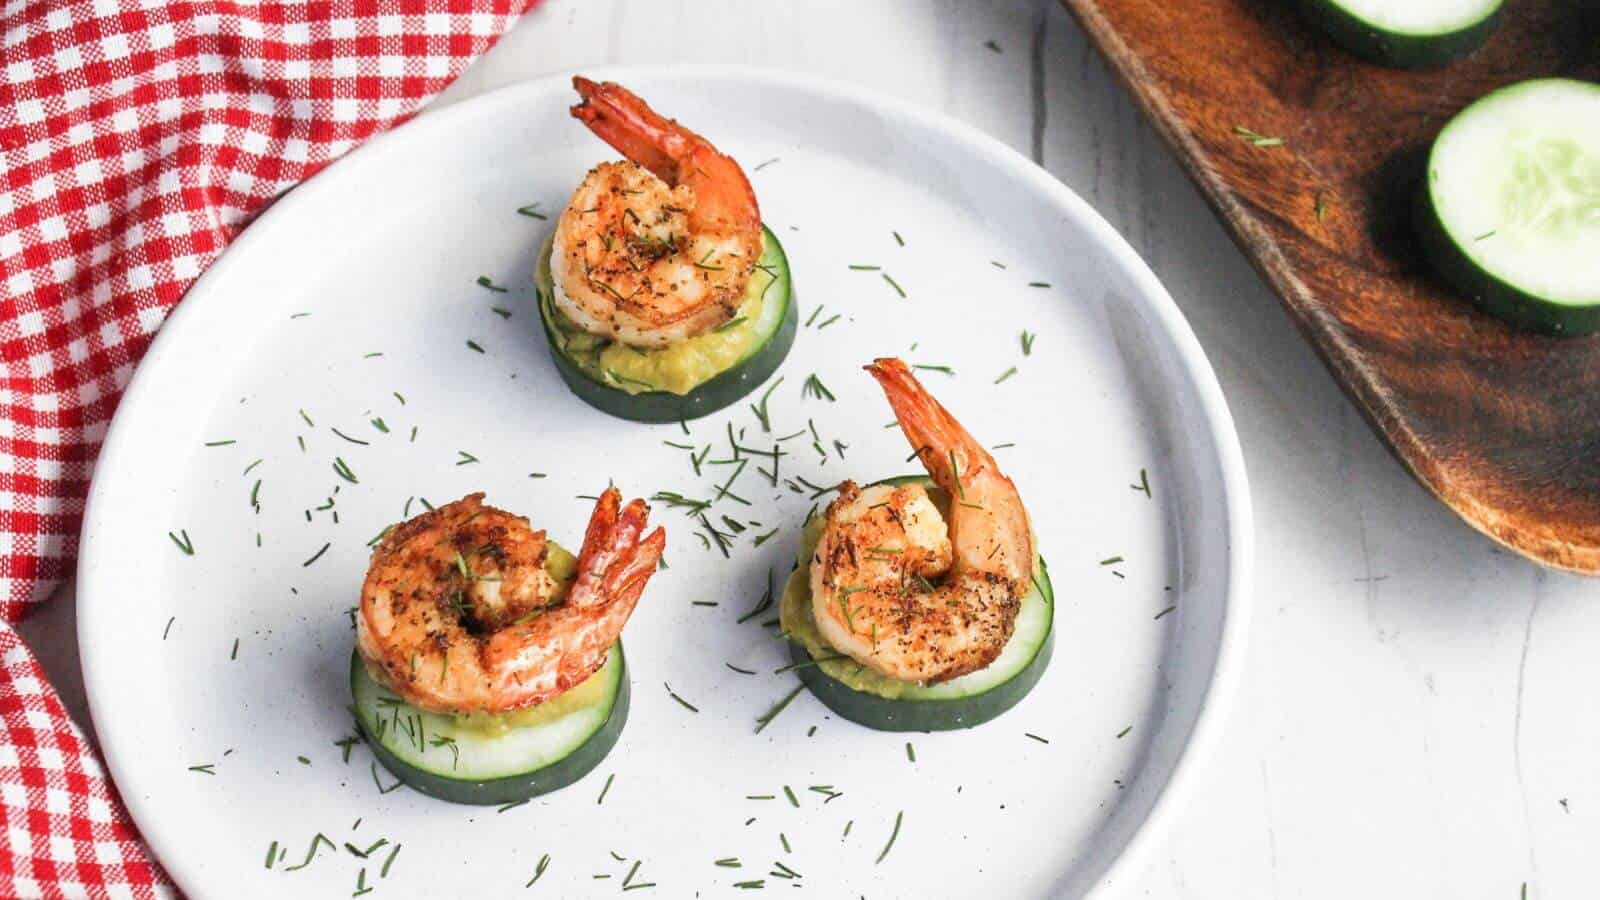 Three grilled shrimp atop cucumber slices garnished with herbs on a white plate with a red checkered napkin partially in view.